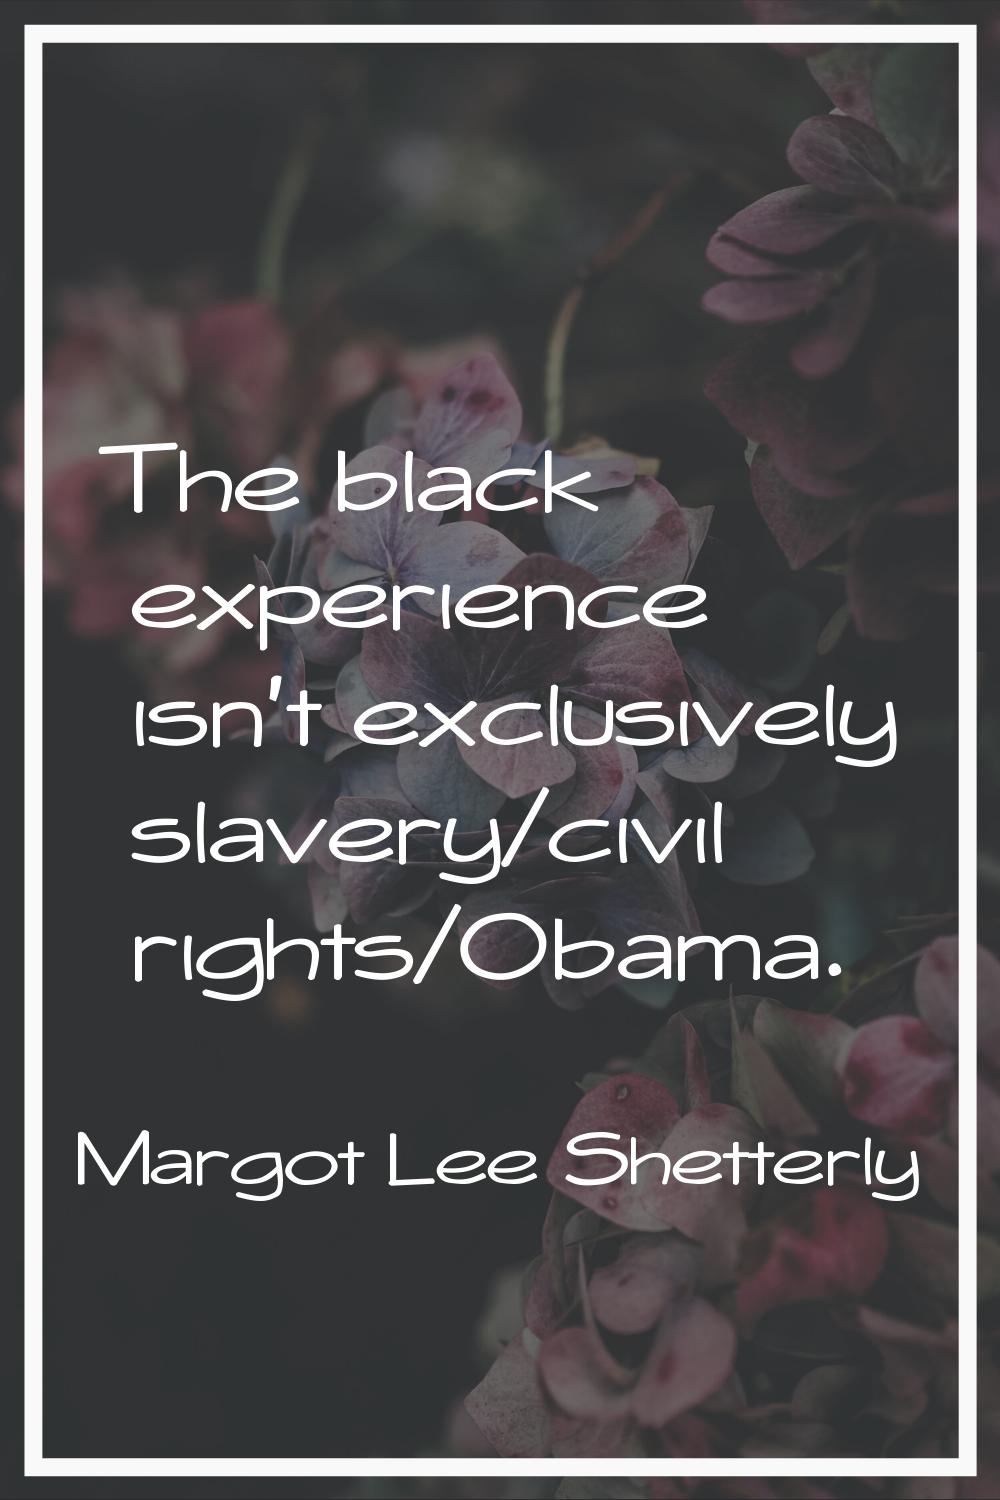 The black experience isn't exclusively slavery/civil rights/Obama.